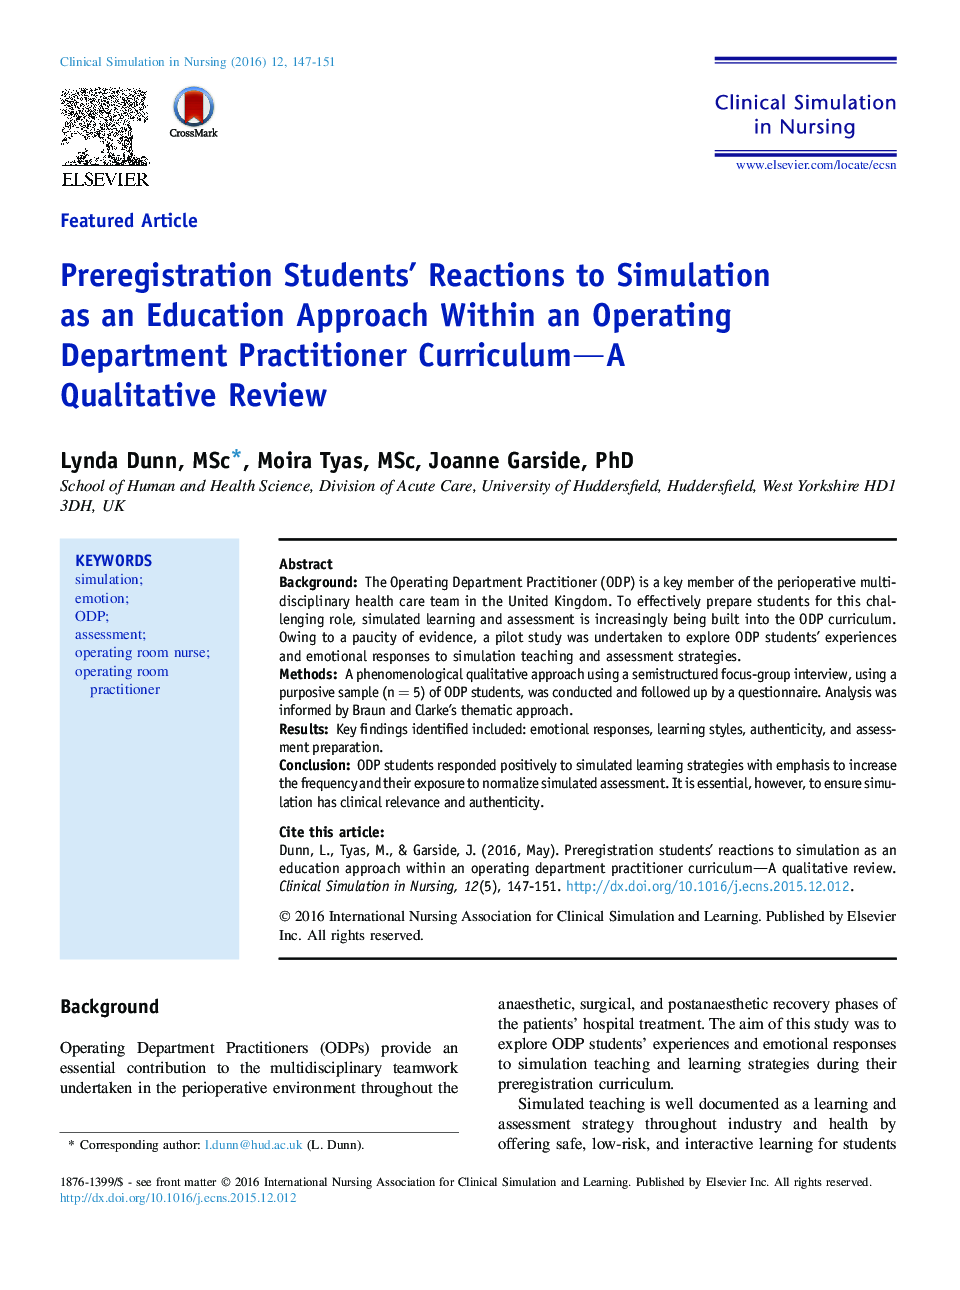 Preregistration Students' Reactions to Simulation as an Education Approach Within an Operating Department Practitioner Curriculum—A Qualitative Review